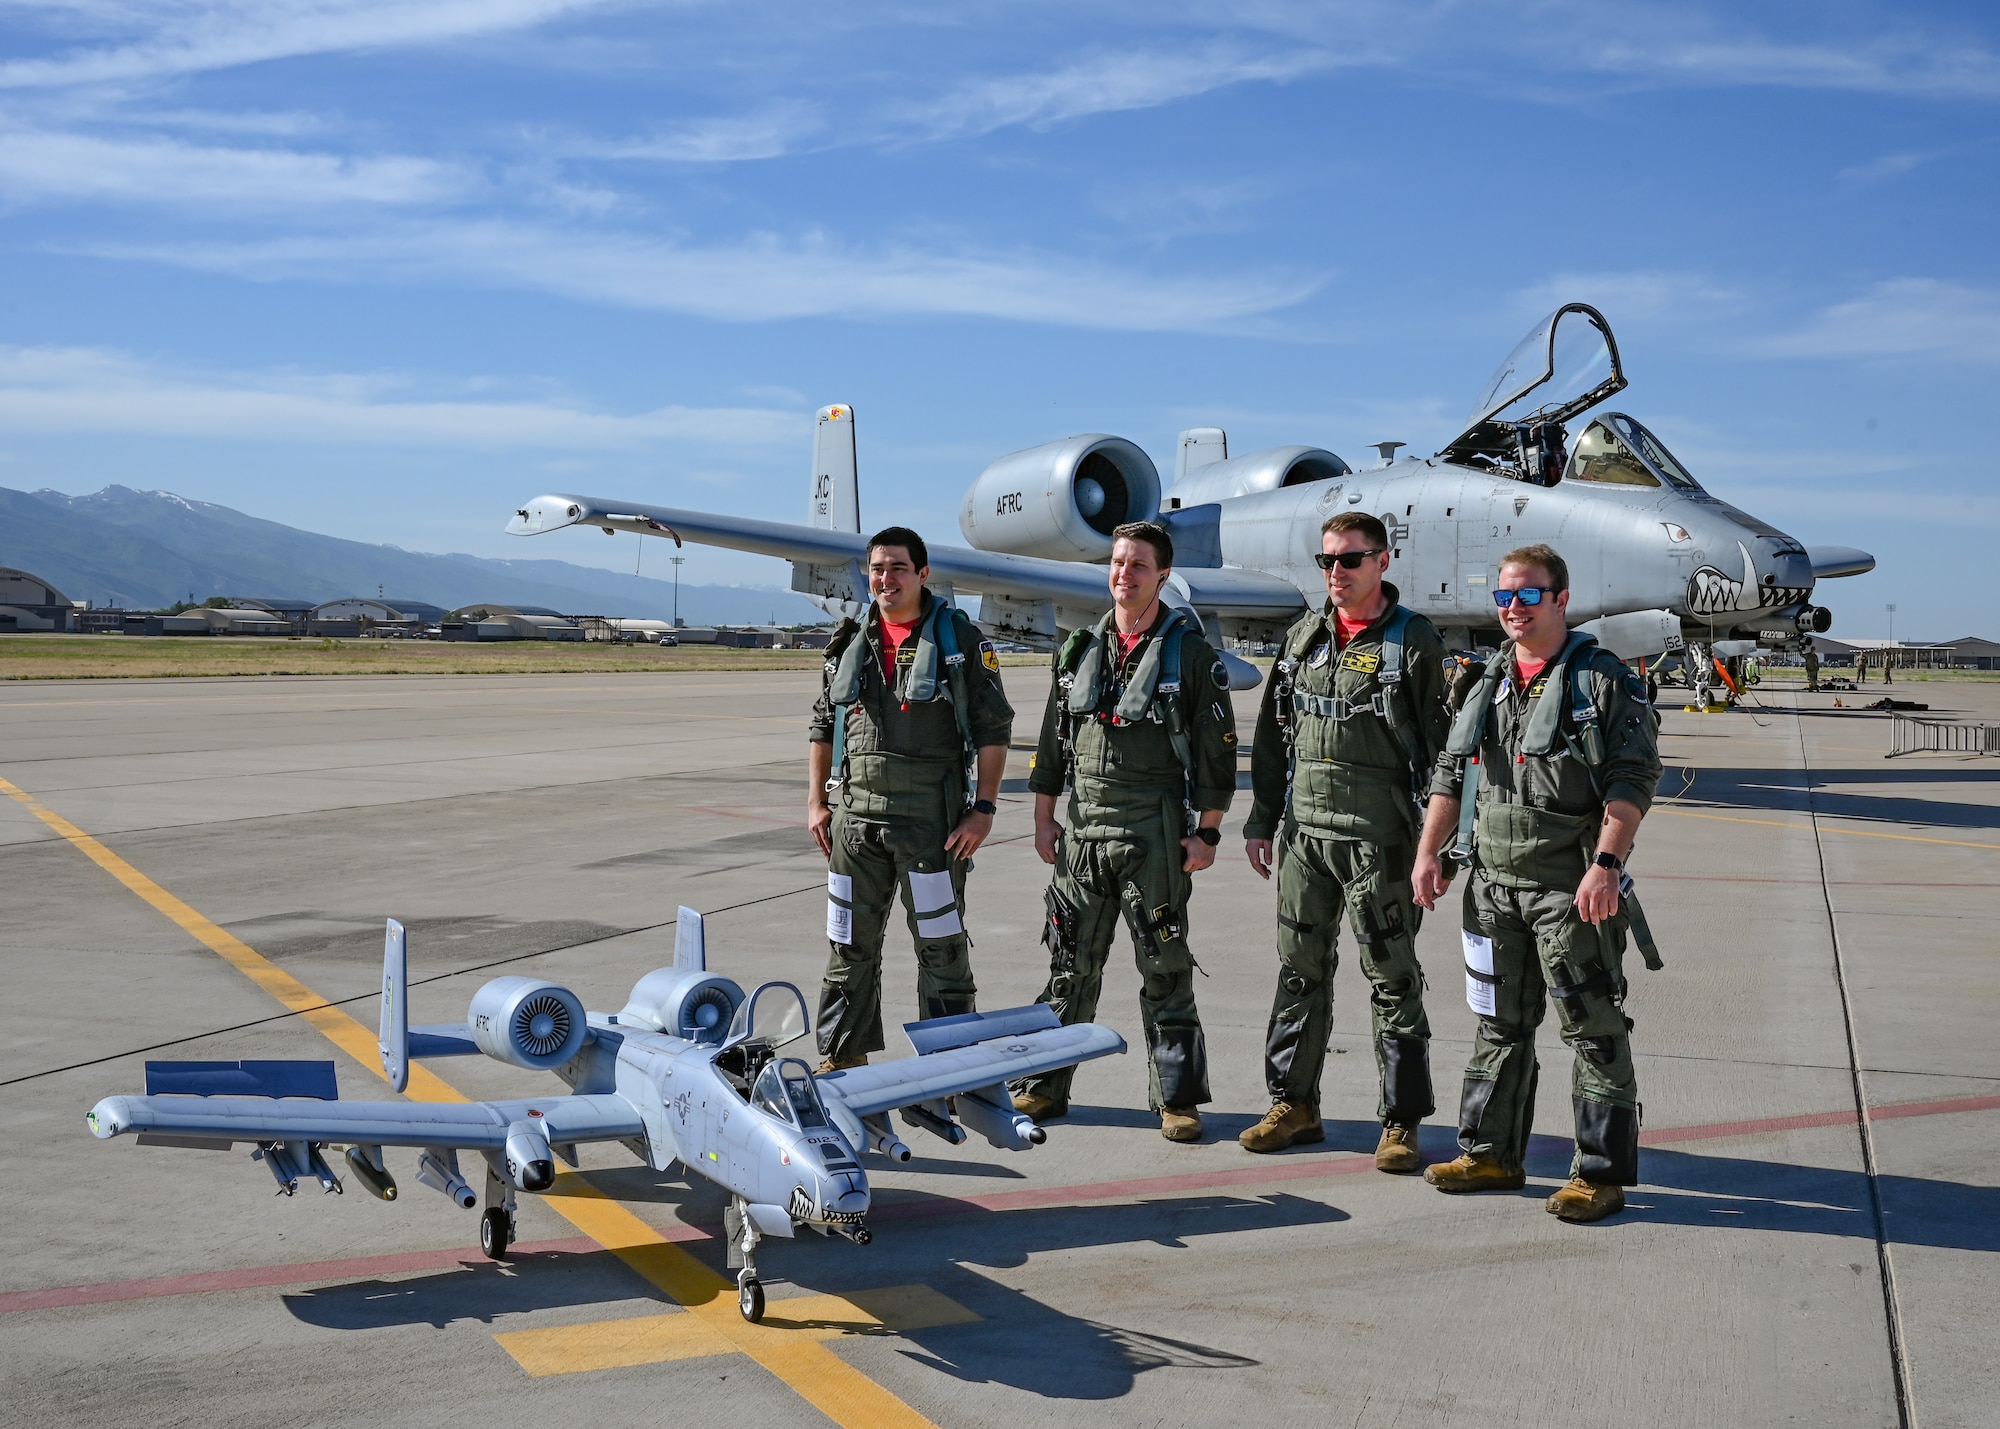 Pilots with the 303d Fighter Squadron are photographed with a remote controlled A-10 Thunderbolt II at Hill Air Force Base, Utah, June 10, 2022. The RC plane, valued at $18,000, requires a turbine engine certificate to fly. (U.S. Air Force photo by Tech. Sgt. Missy Sterling)